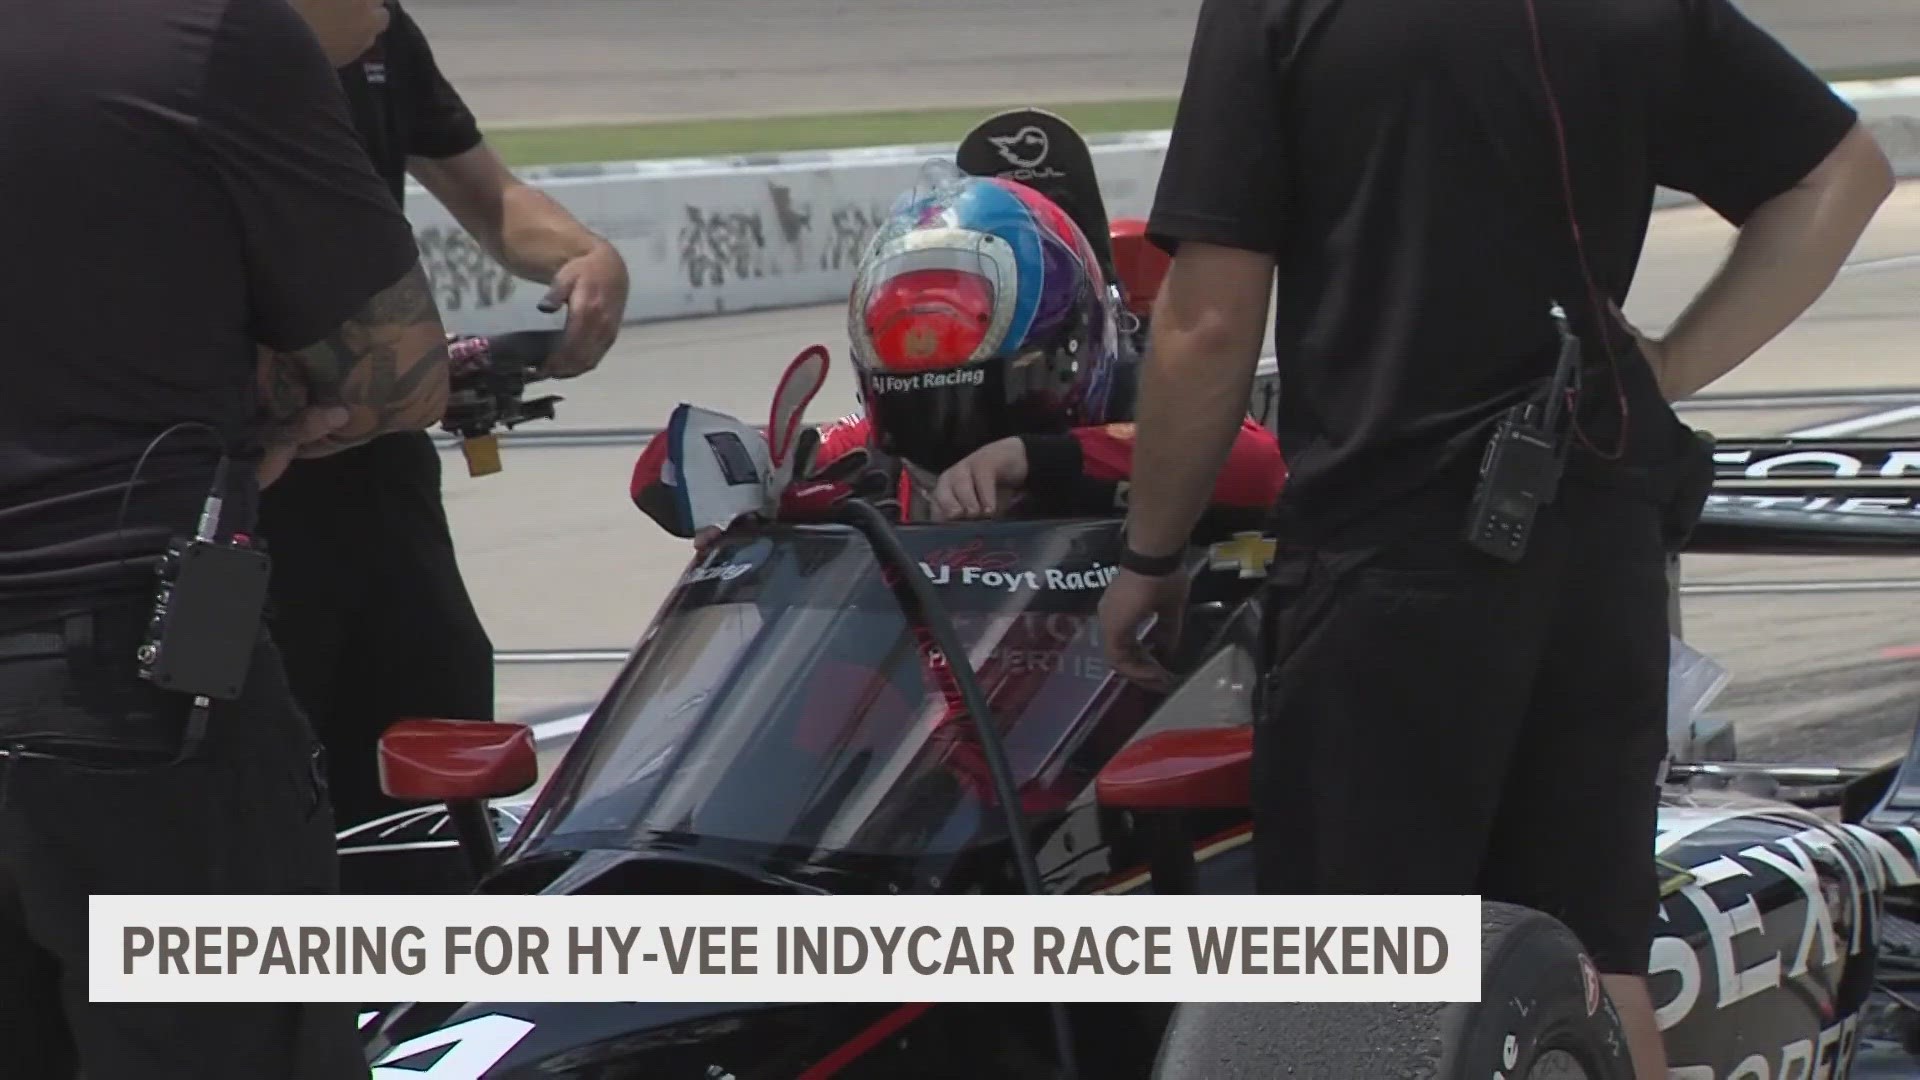 Hy-Vee IndyCar race weekend is about a month away, but on Wednesday, drivers took to the track to do some testing.